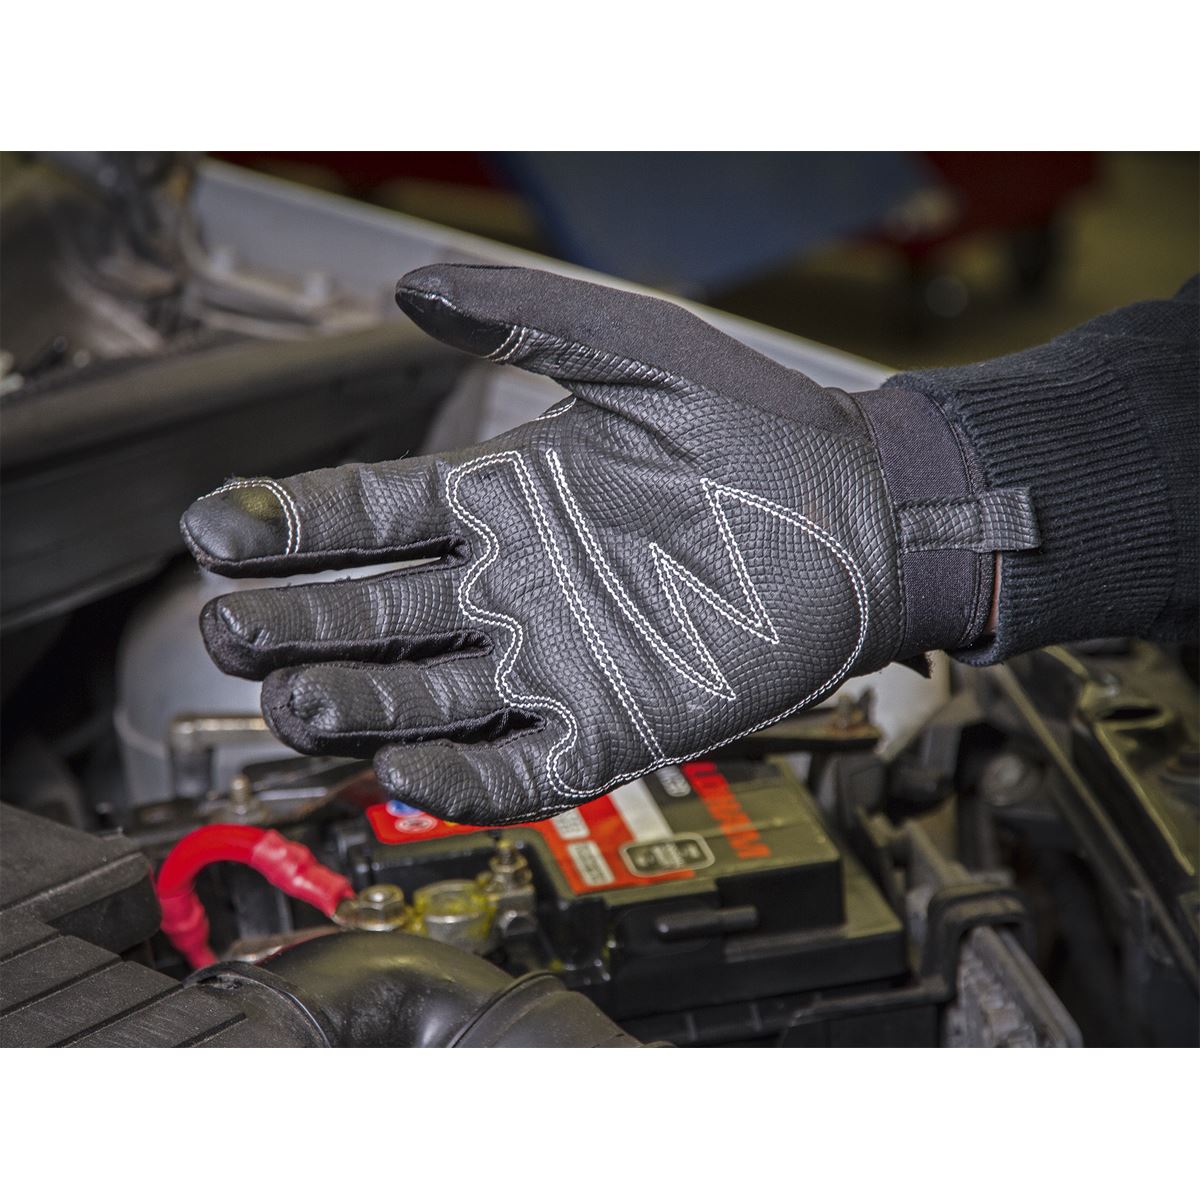 Sealey Premier Mechanic's Gloves Light Palm Tactouch - Large